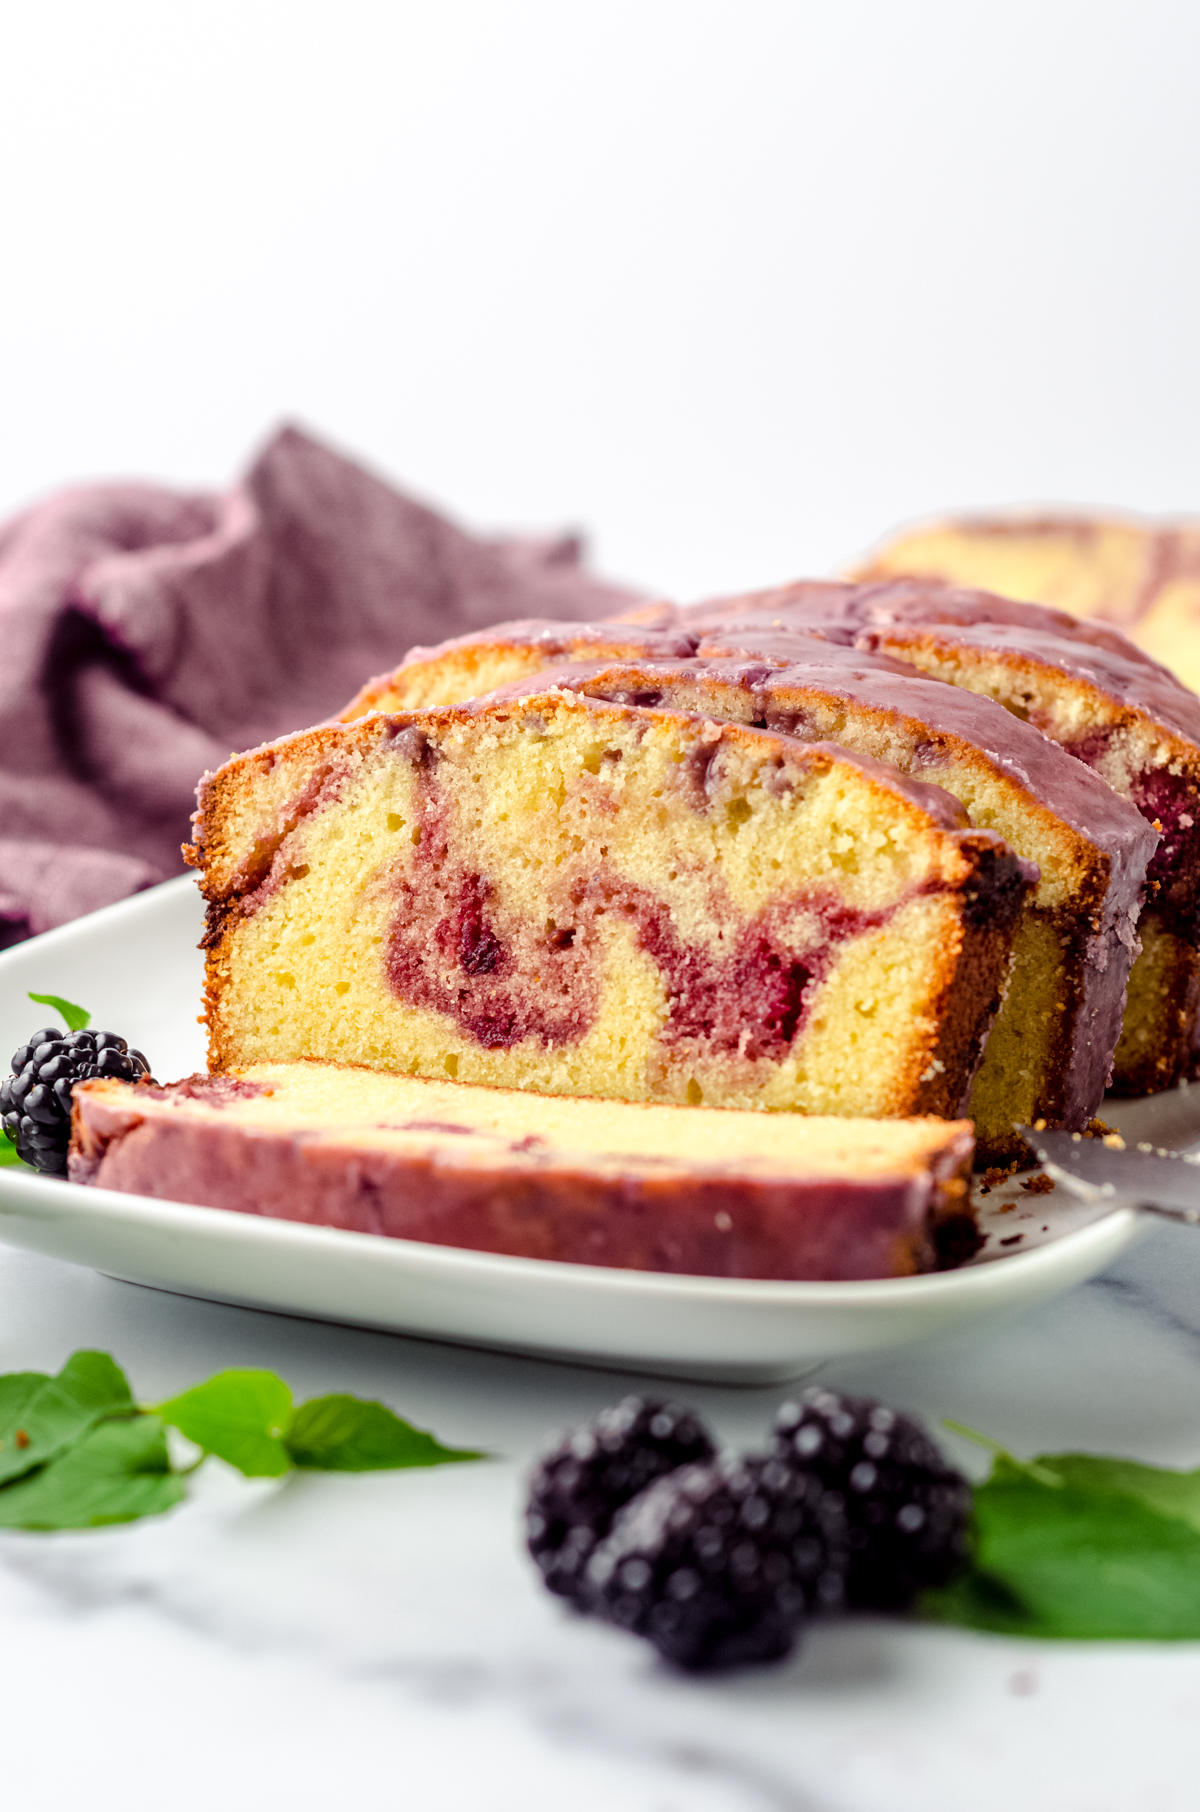 Slices of blackberry pound cake on a plate.